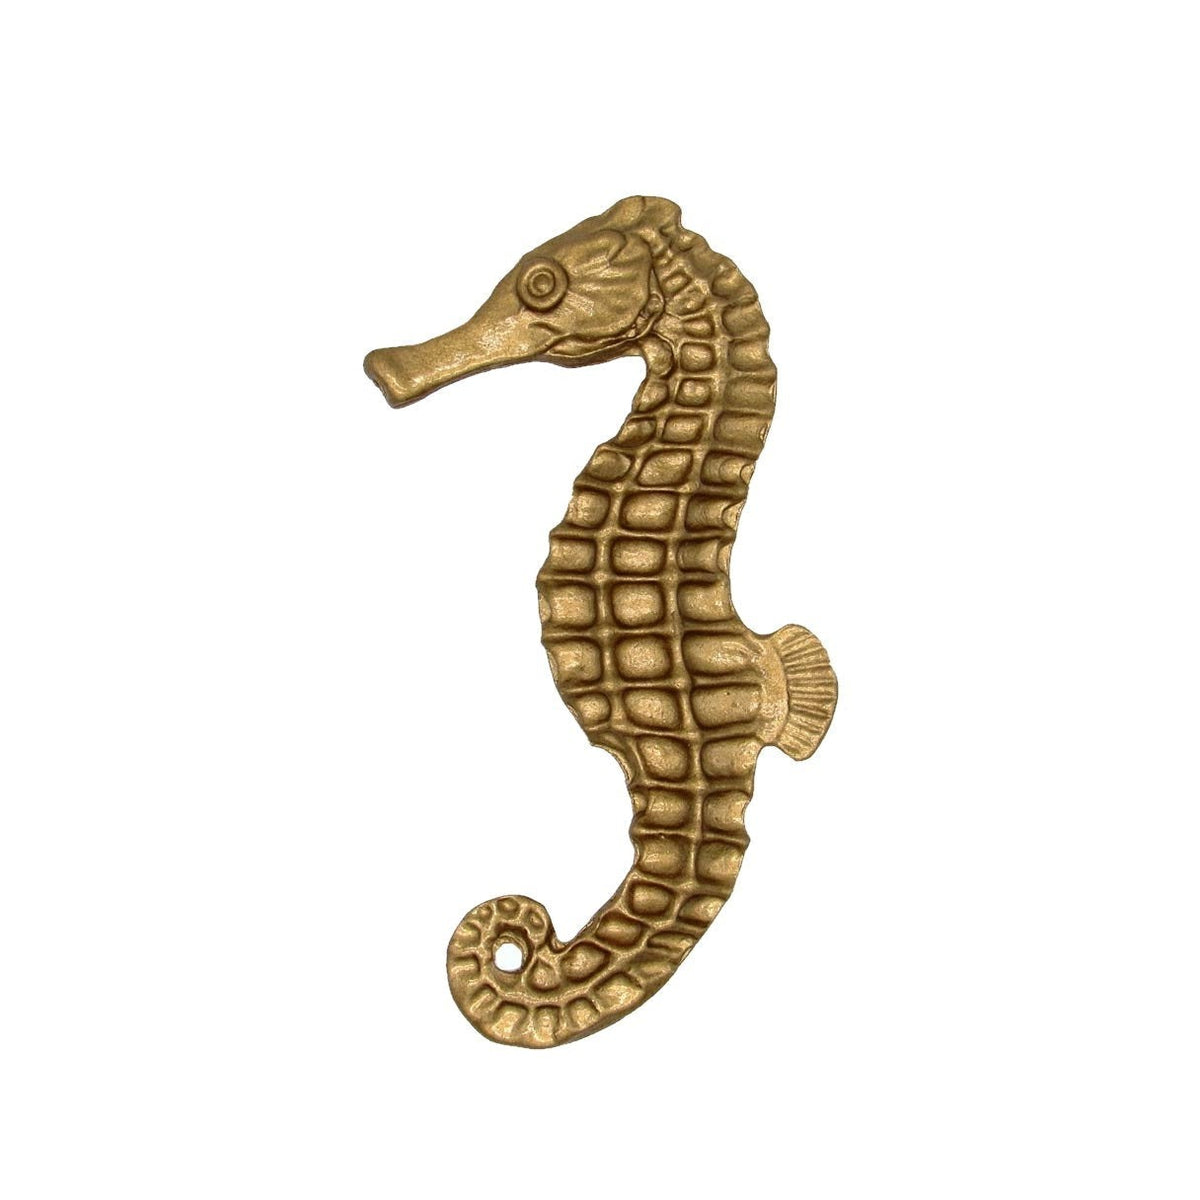 Cabinet Knobs - Rustic Tropical Coastal Seahorse - Right Facing - Lux Gold